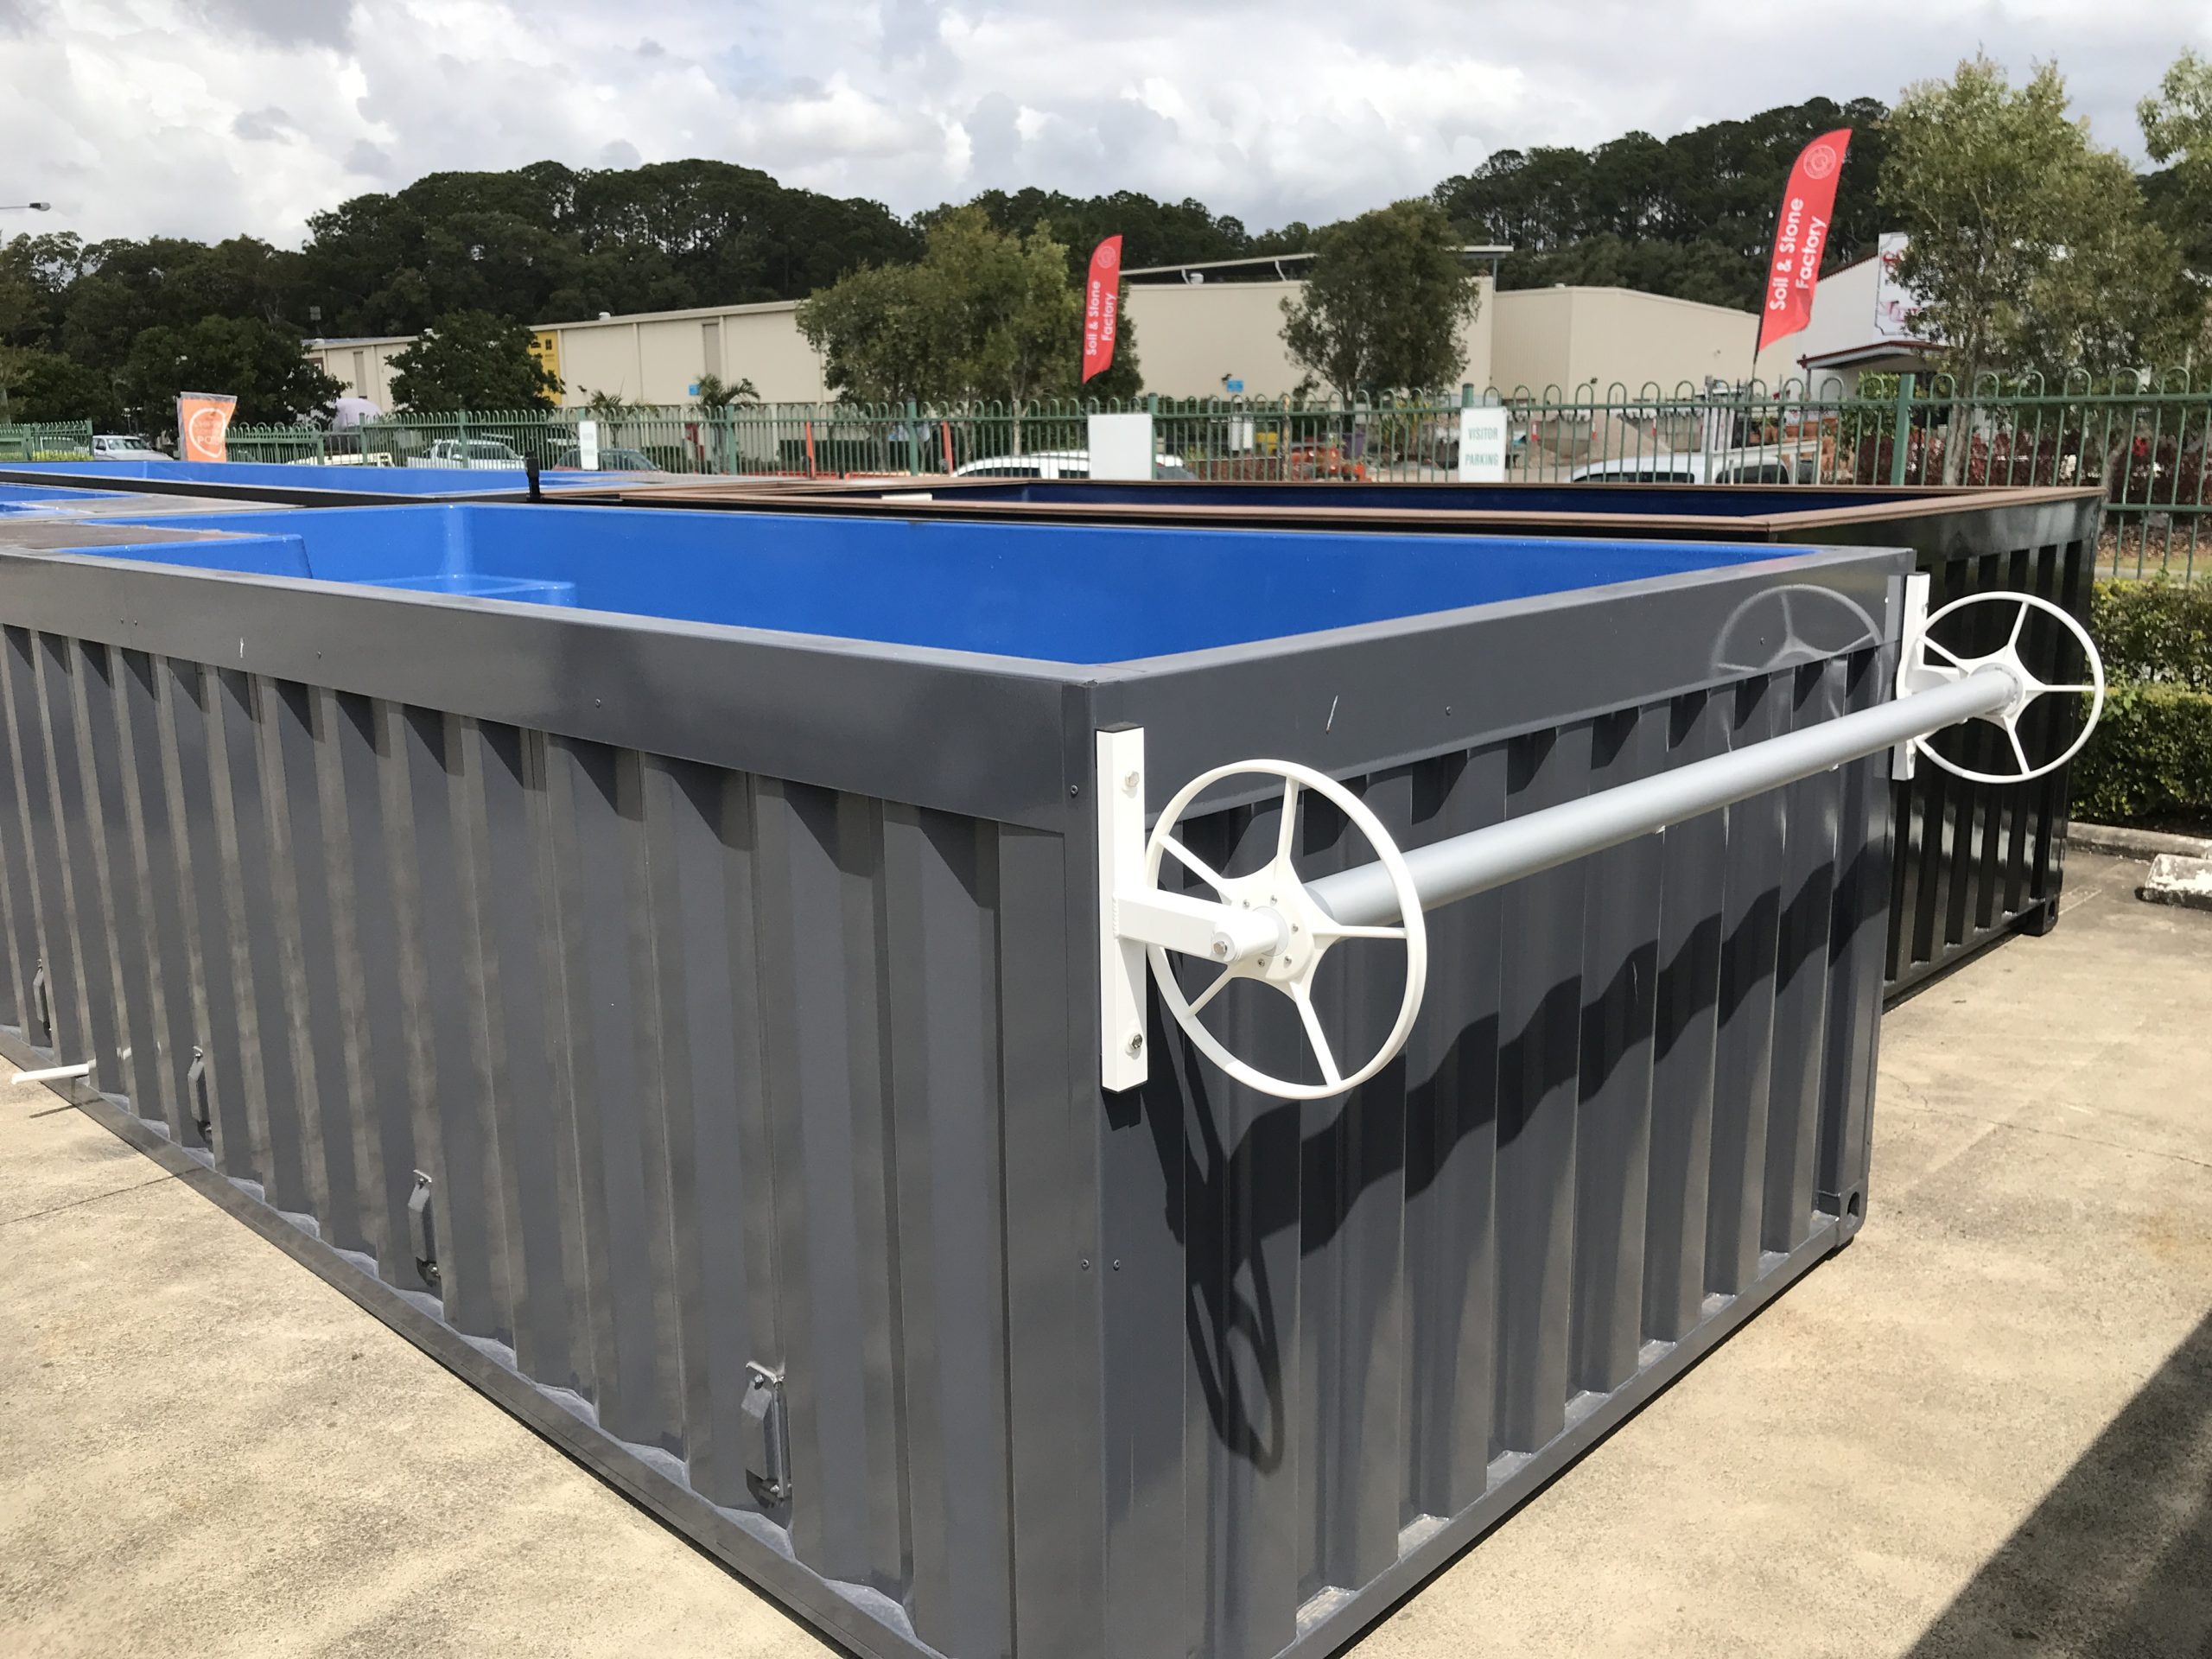 Daisy SQ Roller mounted on a Sea Container Pool.